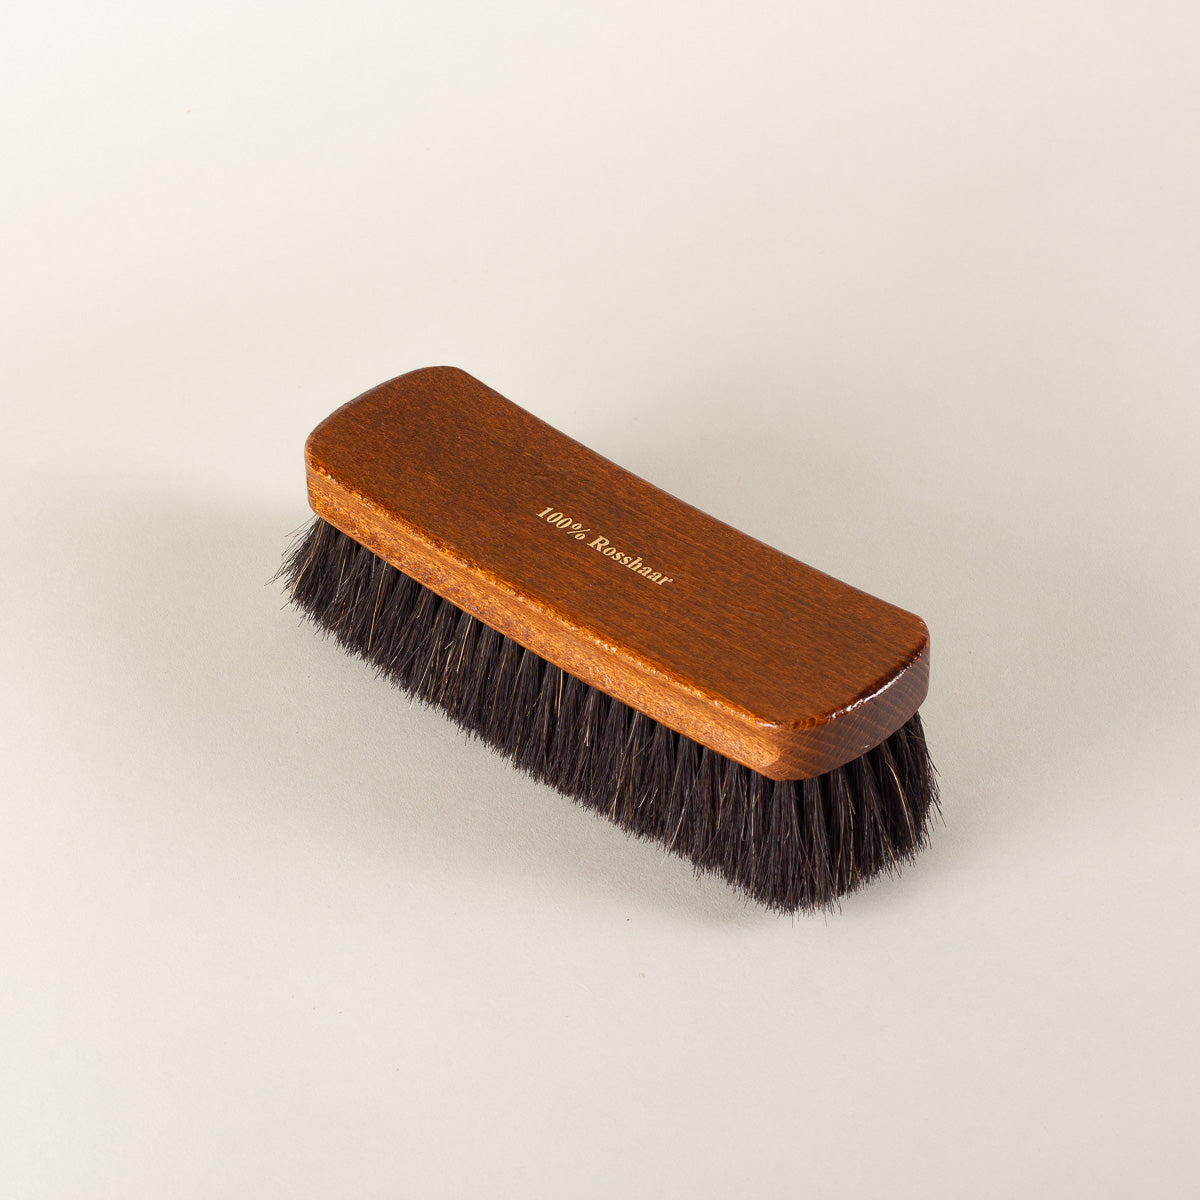 Deluxe set of shoe care brushes, 100% horsehair